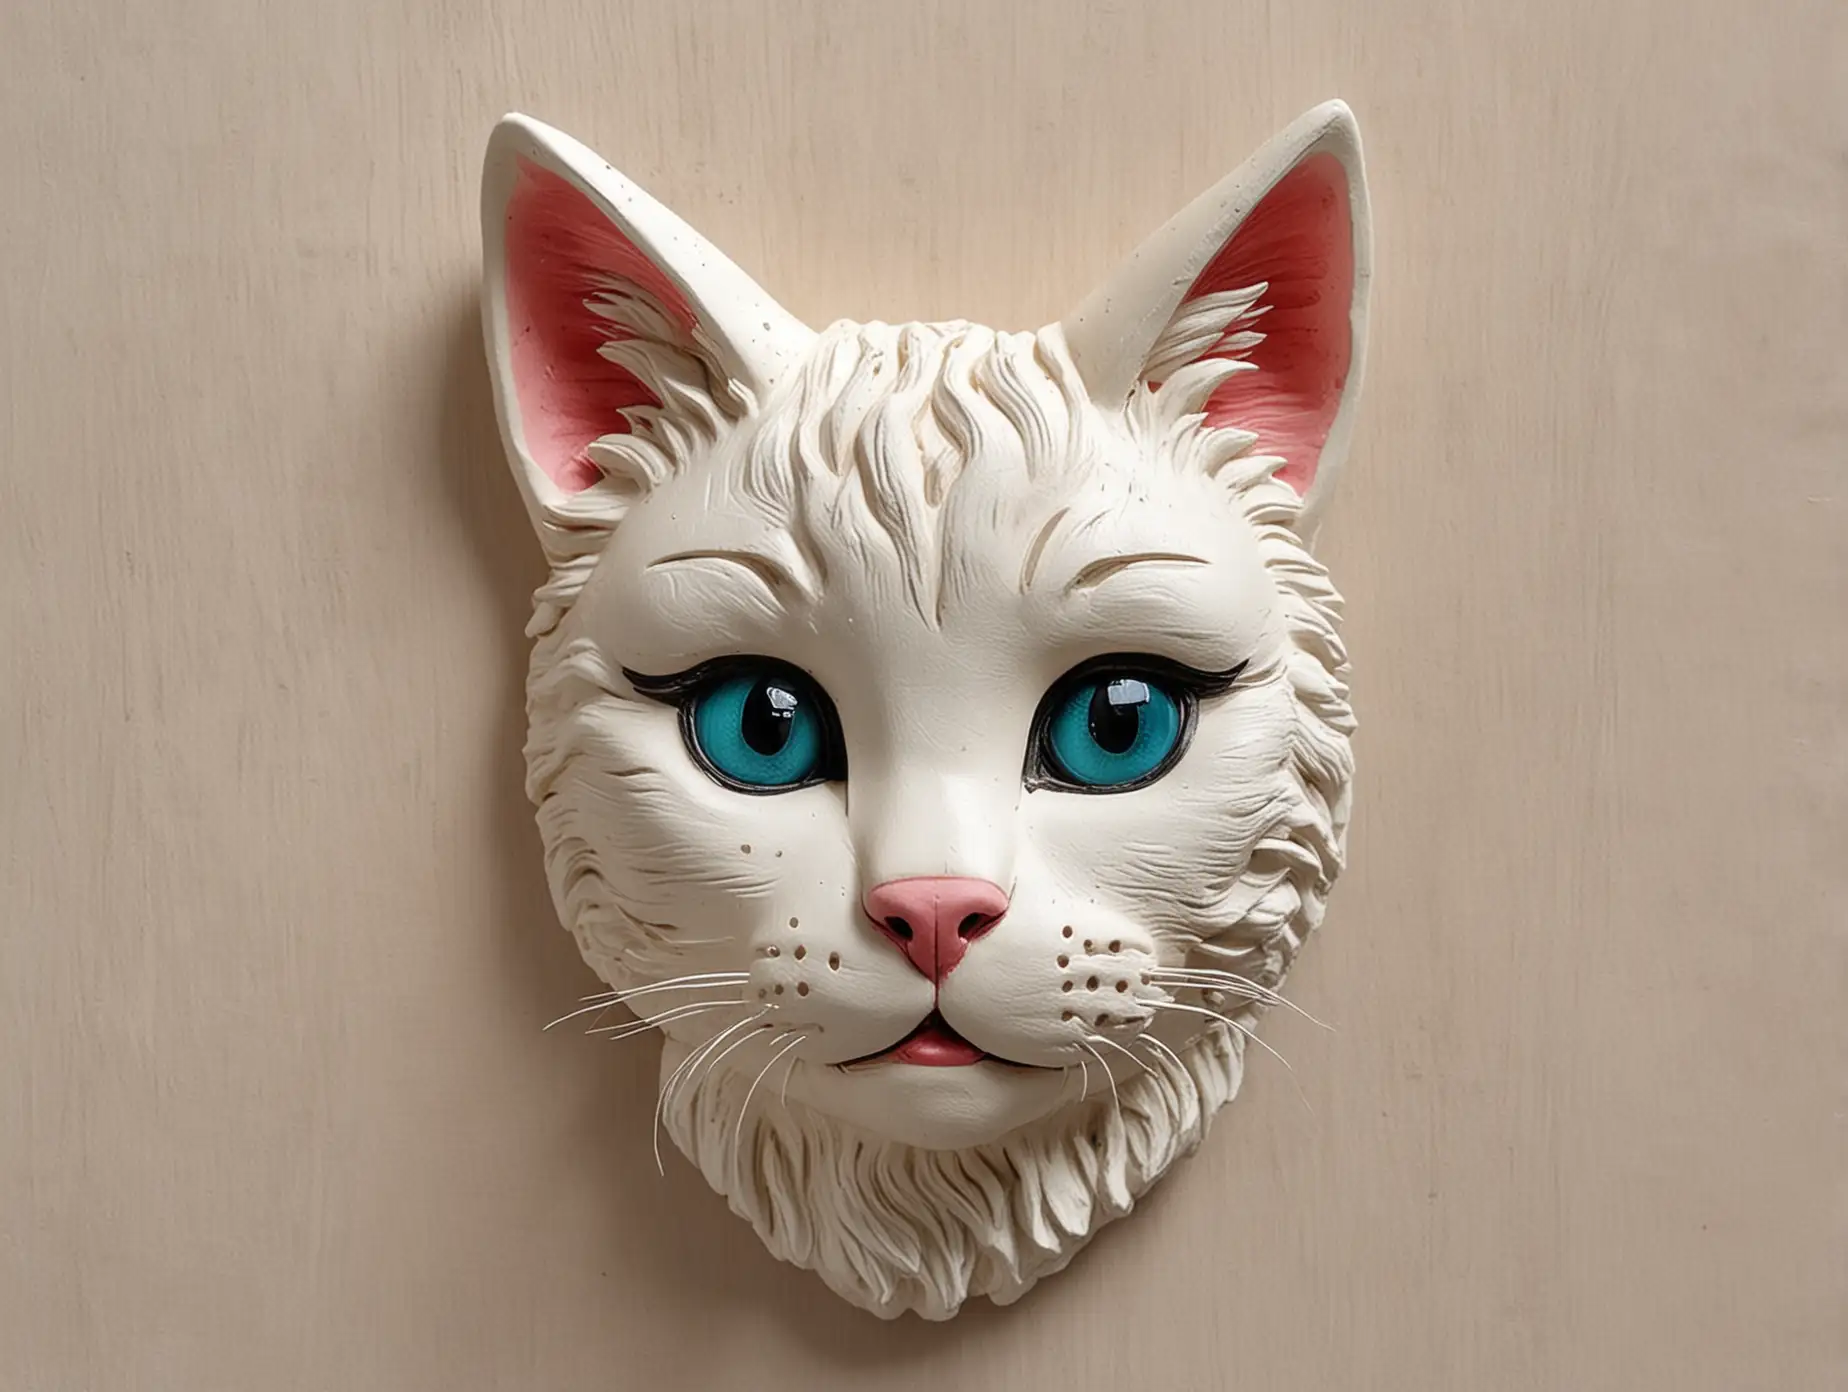 Plaster-Kitty-Wall-Decoration-Cute-Cat-Sculpture-Crafted-from-Plaster